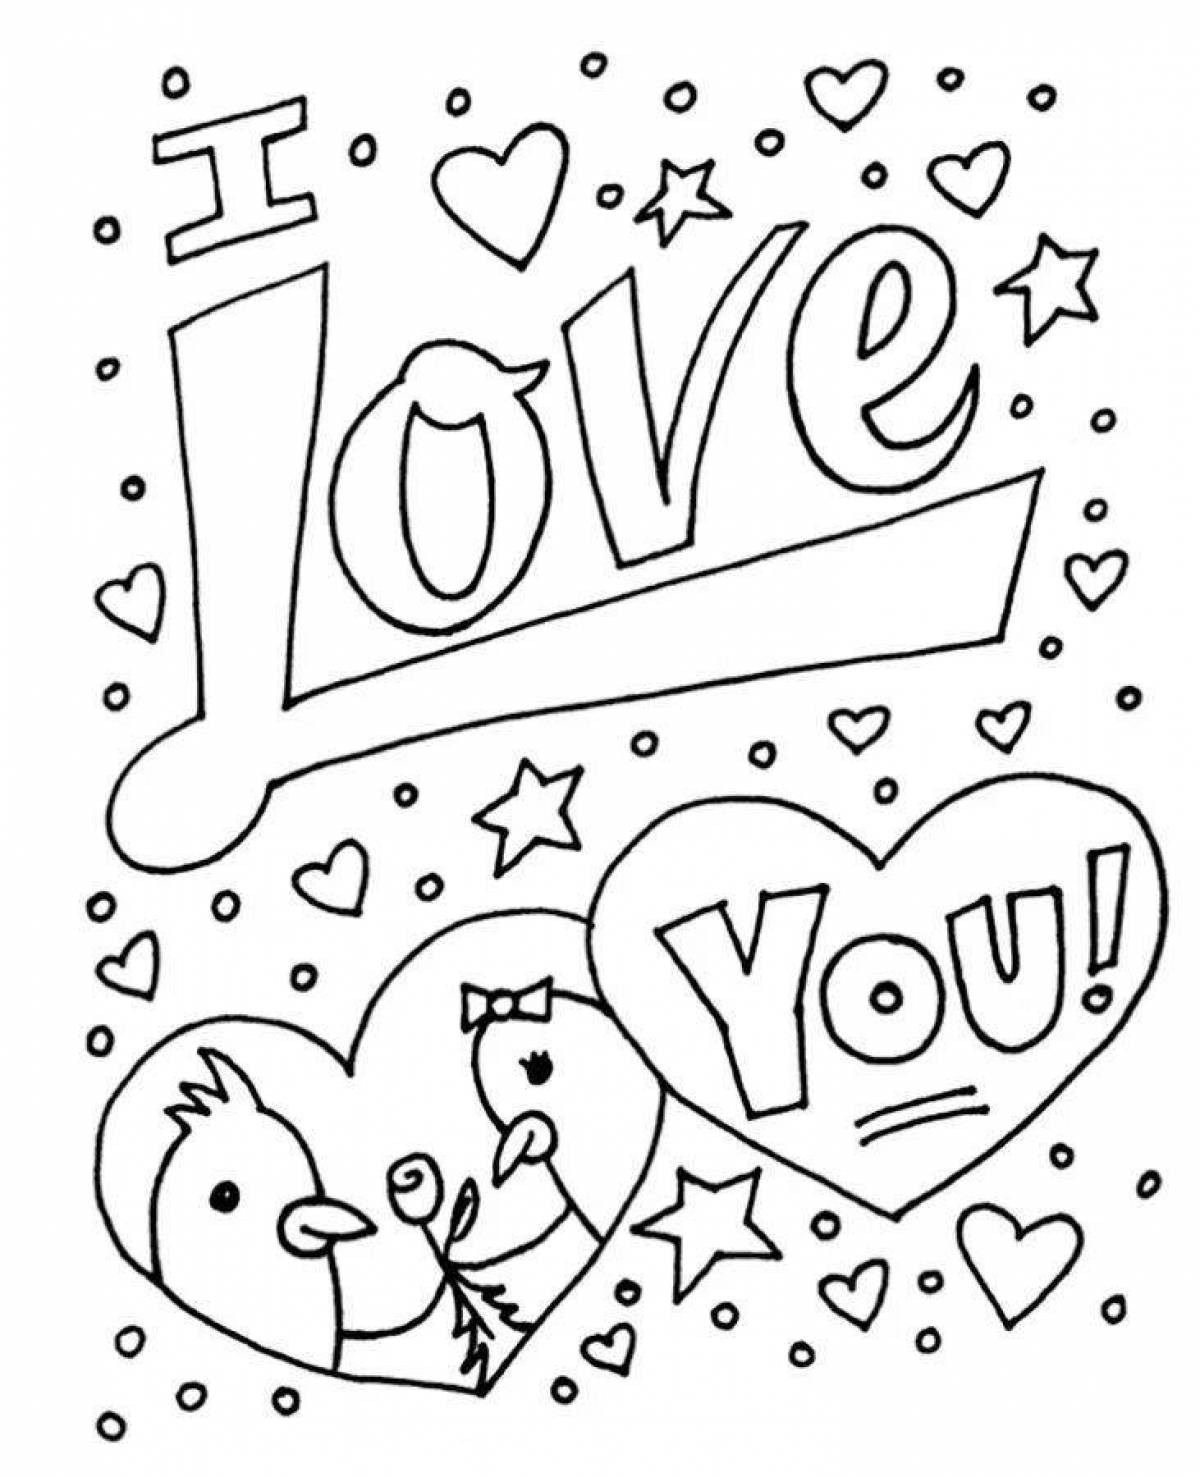 Brilliant i love you coloring page